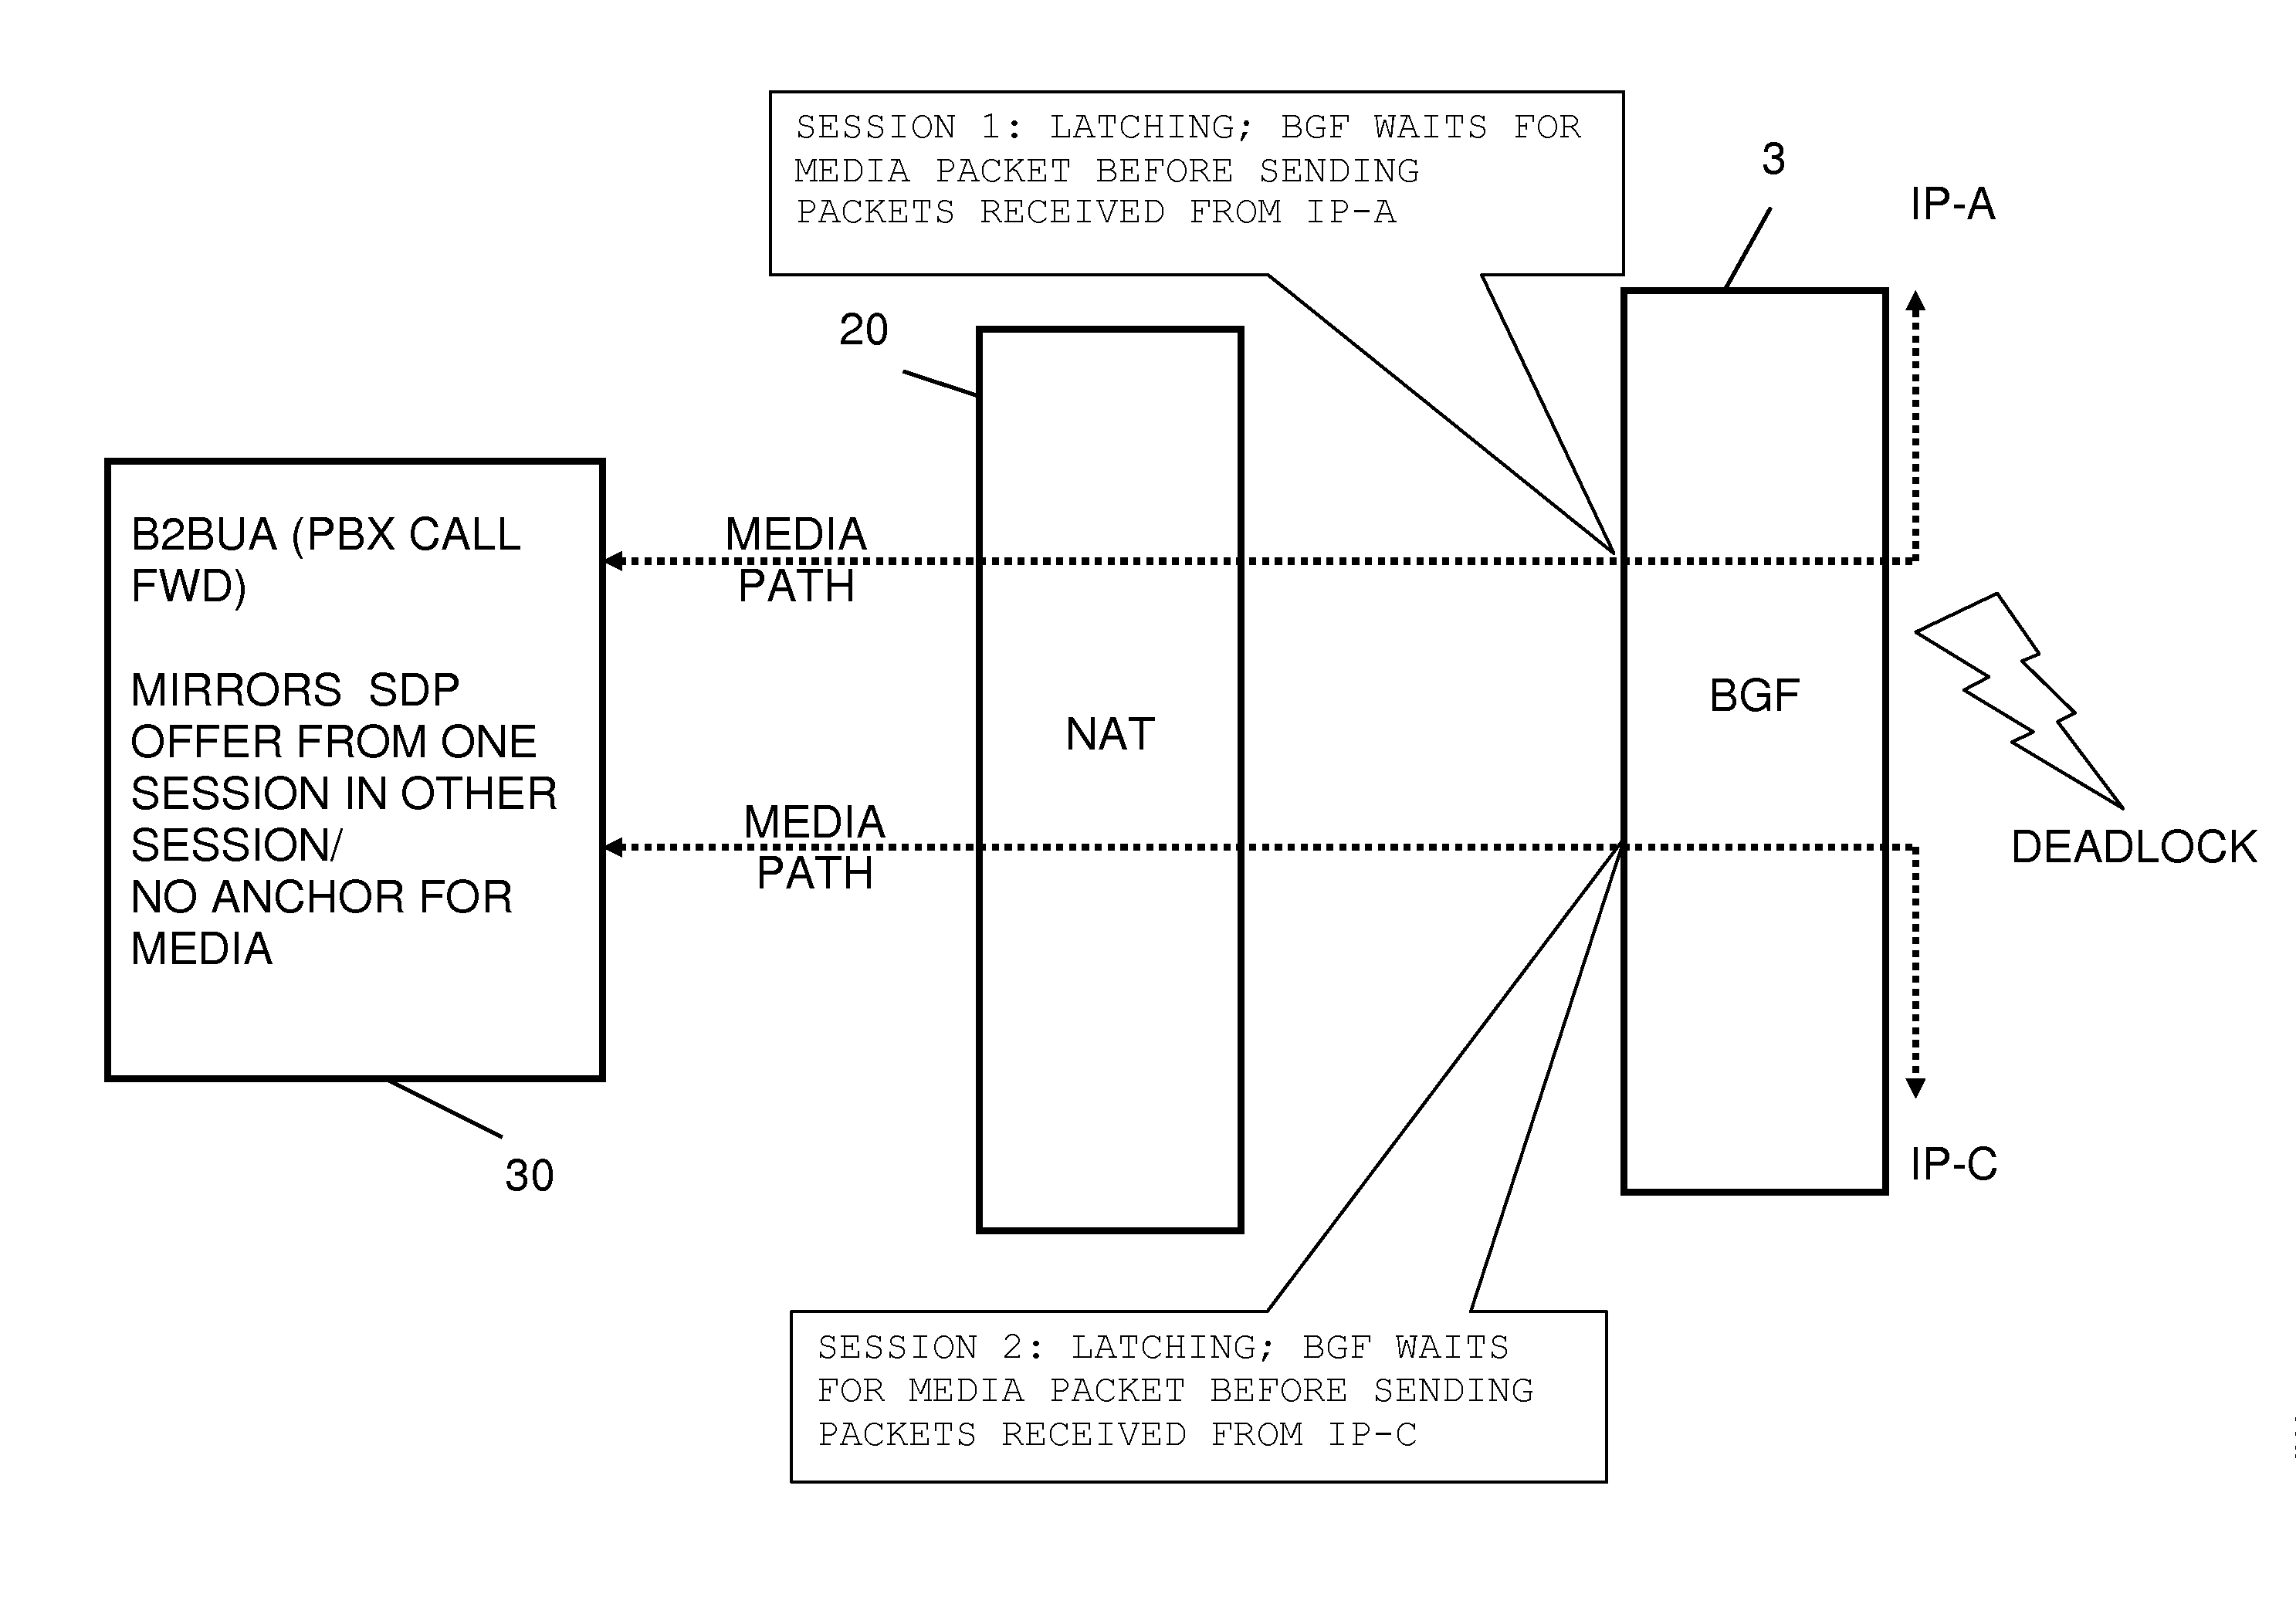 Connection Control with B2BUA Located Behind NAT Gateway